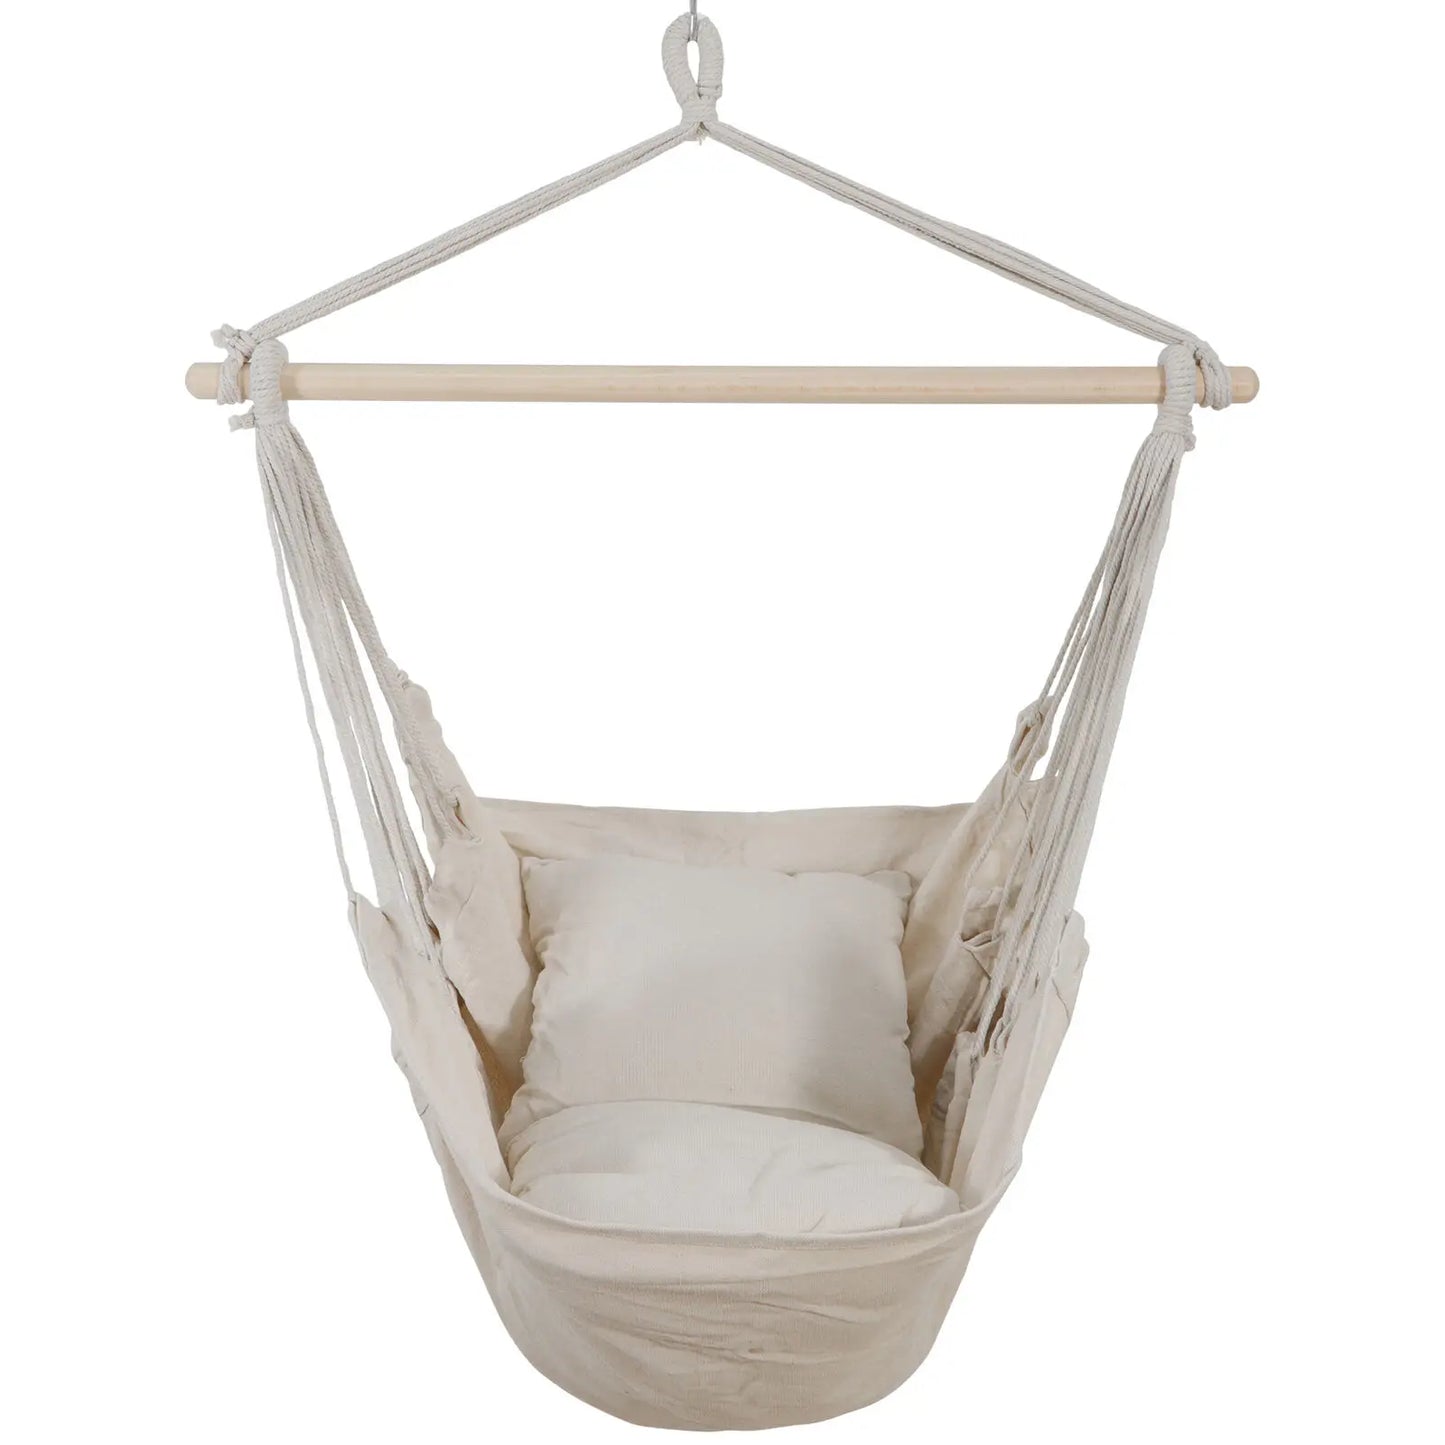 Beige Hammock Chair Swing Hanging Rope with 2 Cushions